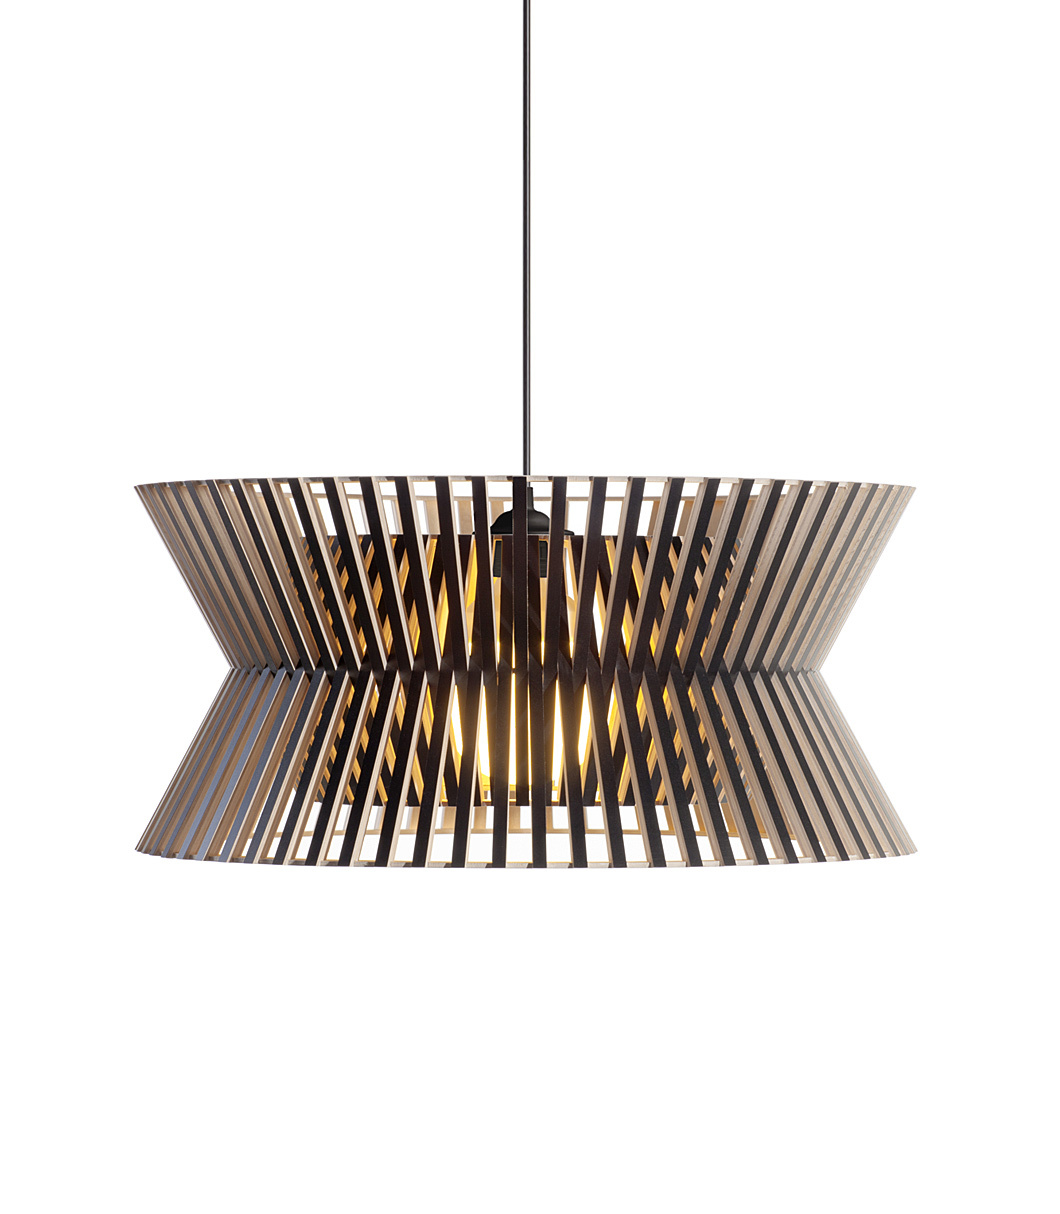 Kontro 6000 pendant lamp is available in black laminated